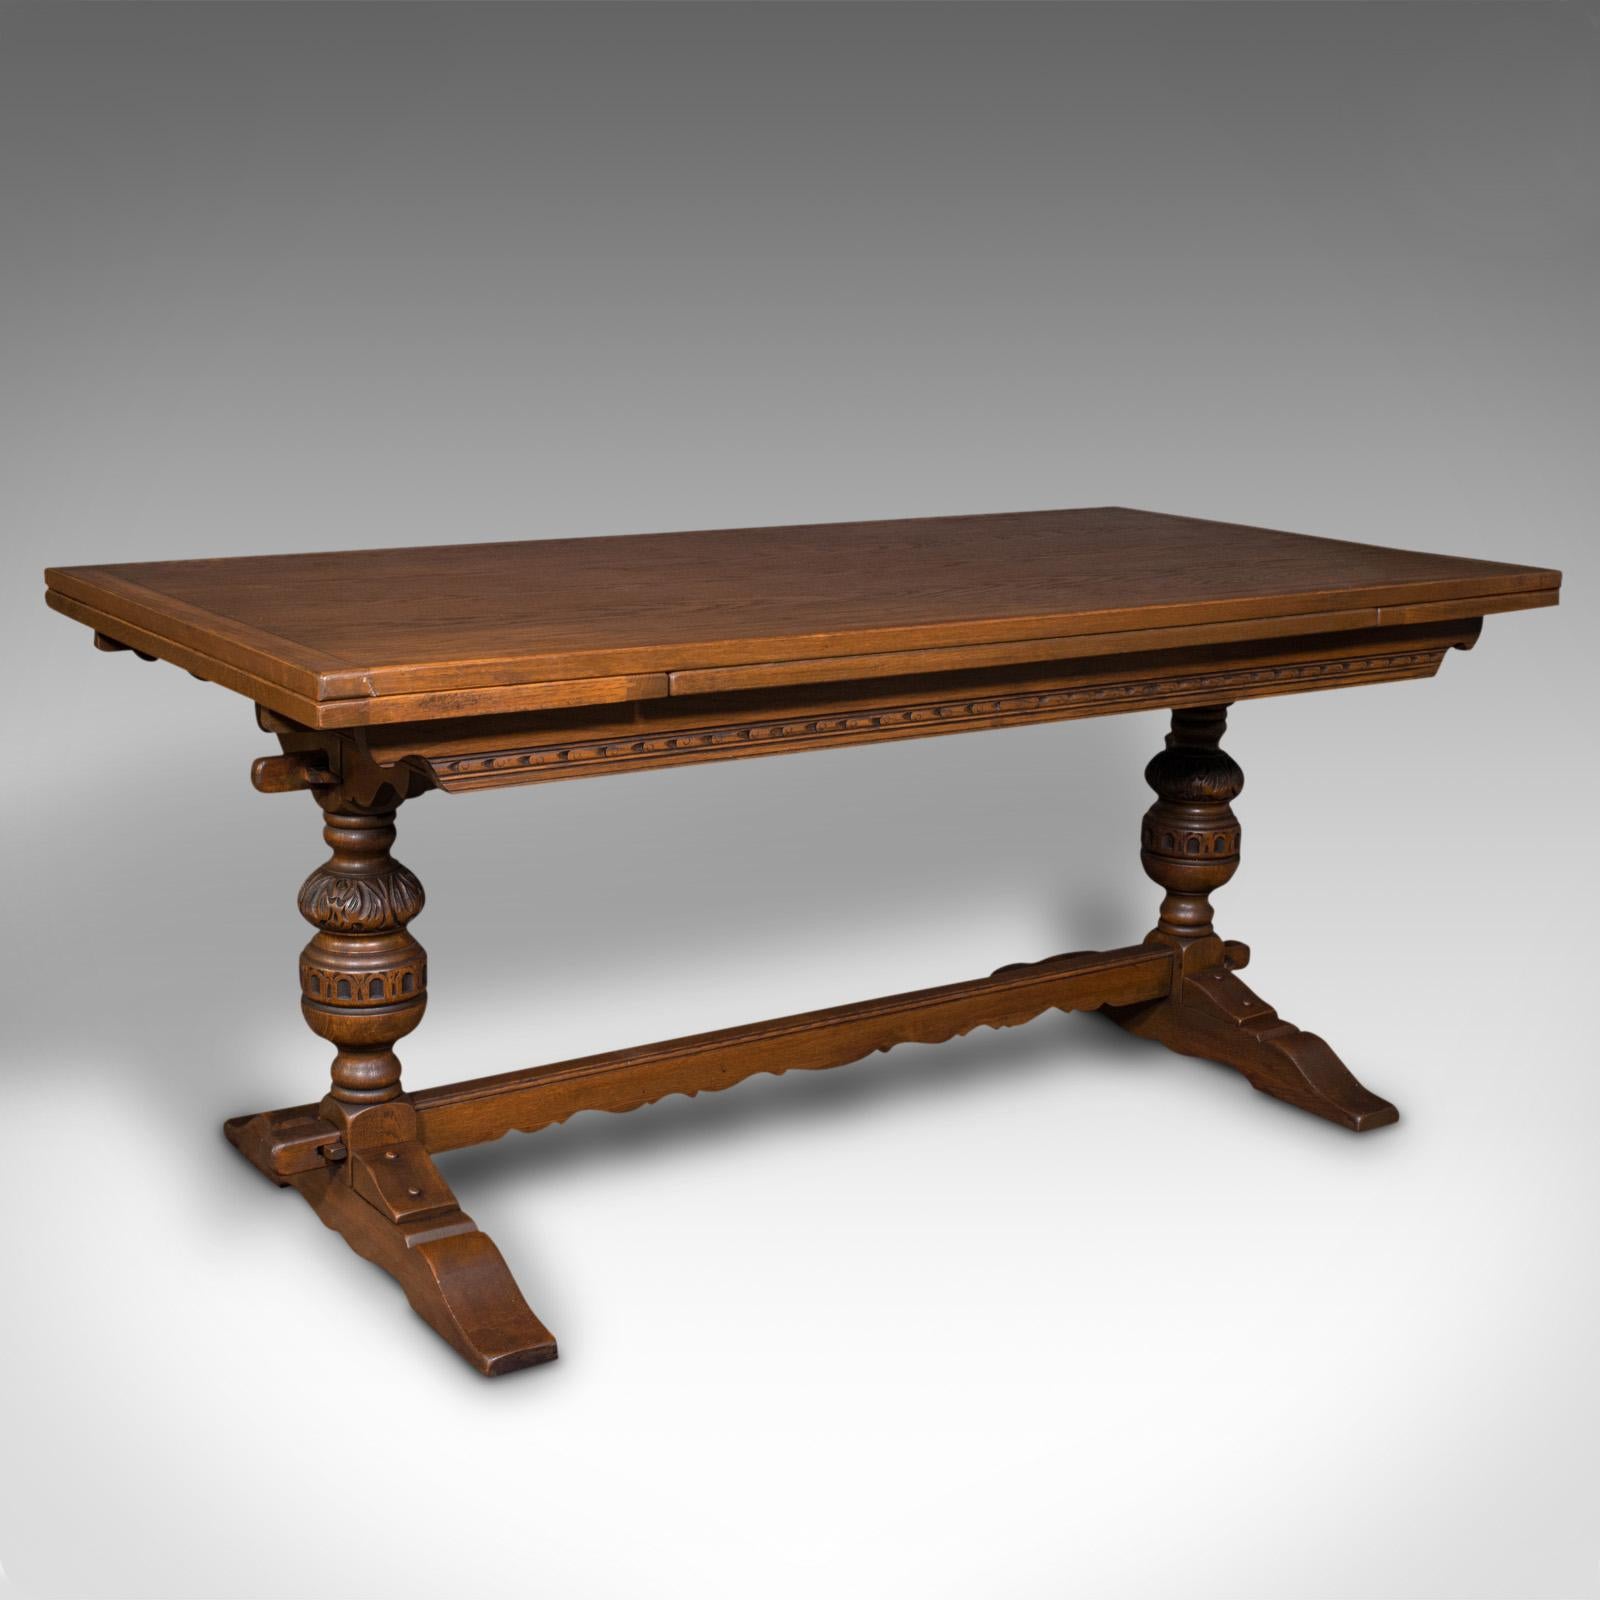 This is a large antique extending dining table. An English, oak 6-8 seat table of country house proportion, dating to the Edwardian period, circa 1910.

Accommodate your friends and family around this generously sized table
Displays a desirable